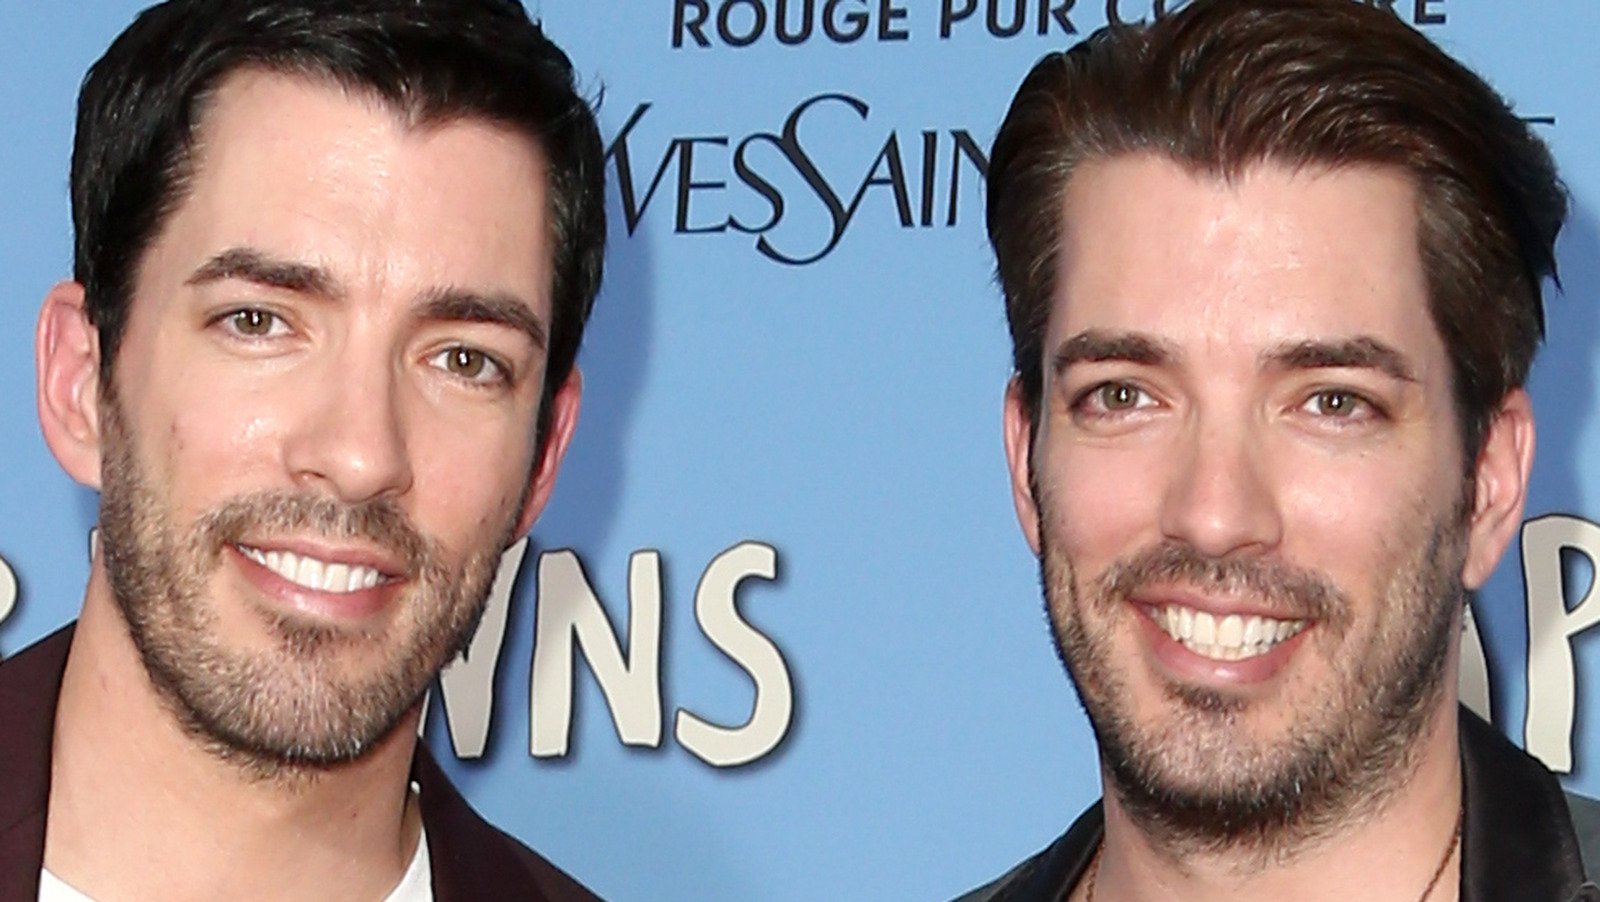 The Surprising Trick The Property Brothers' Mom Uses To Tell The Twins Apart